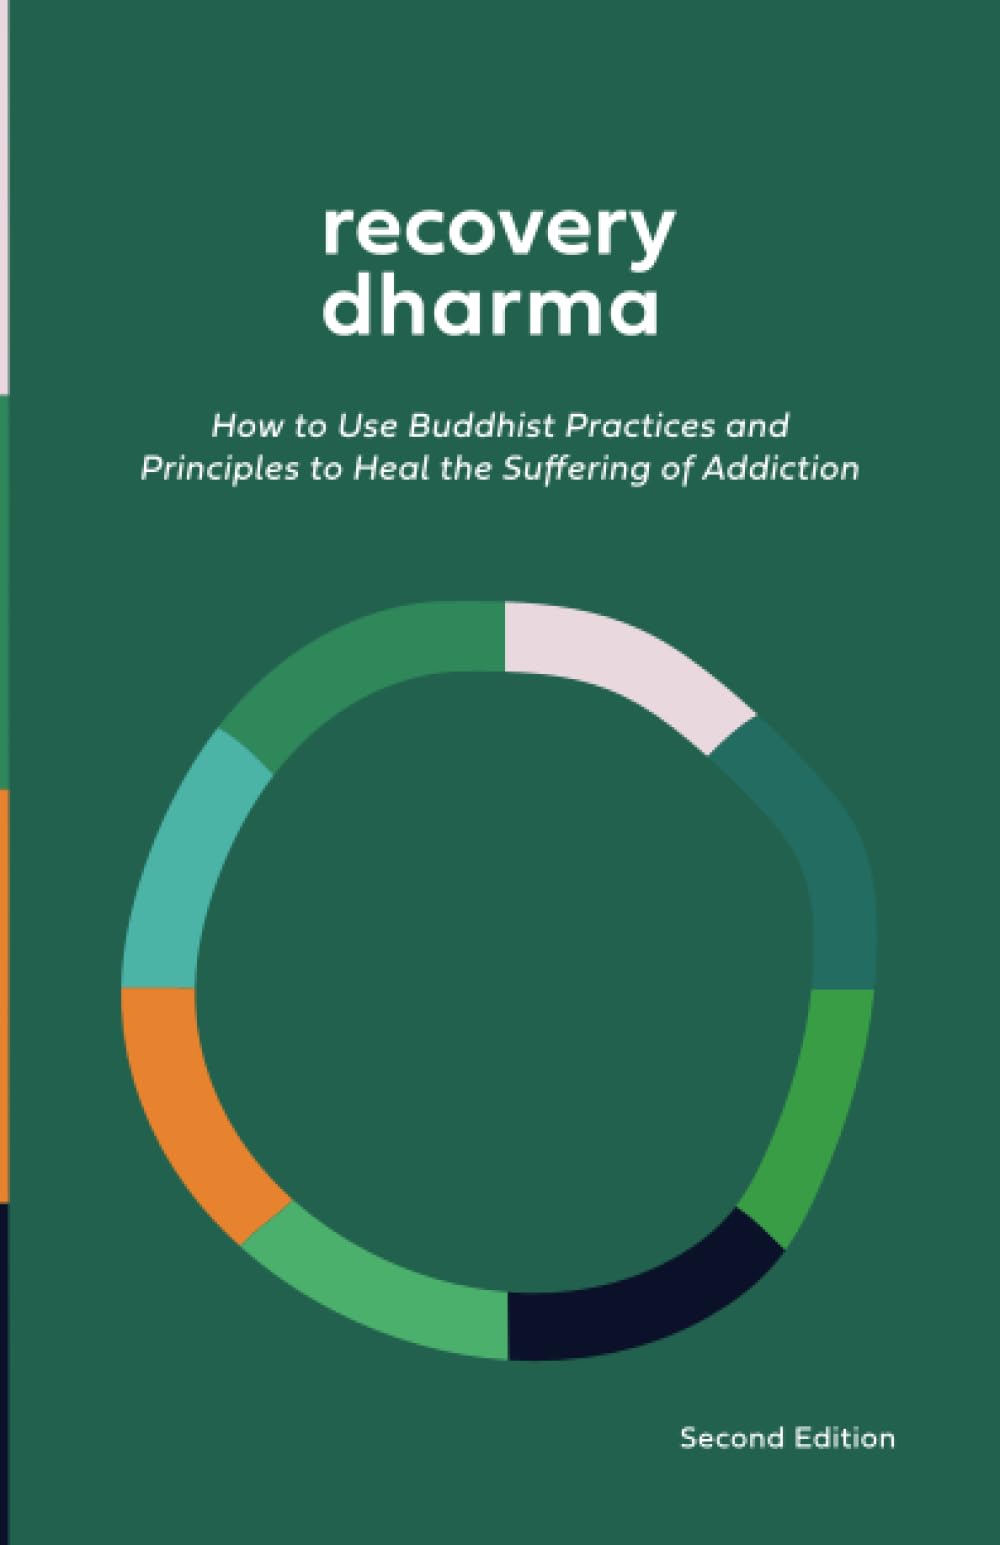 Recovery Dharma book